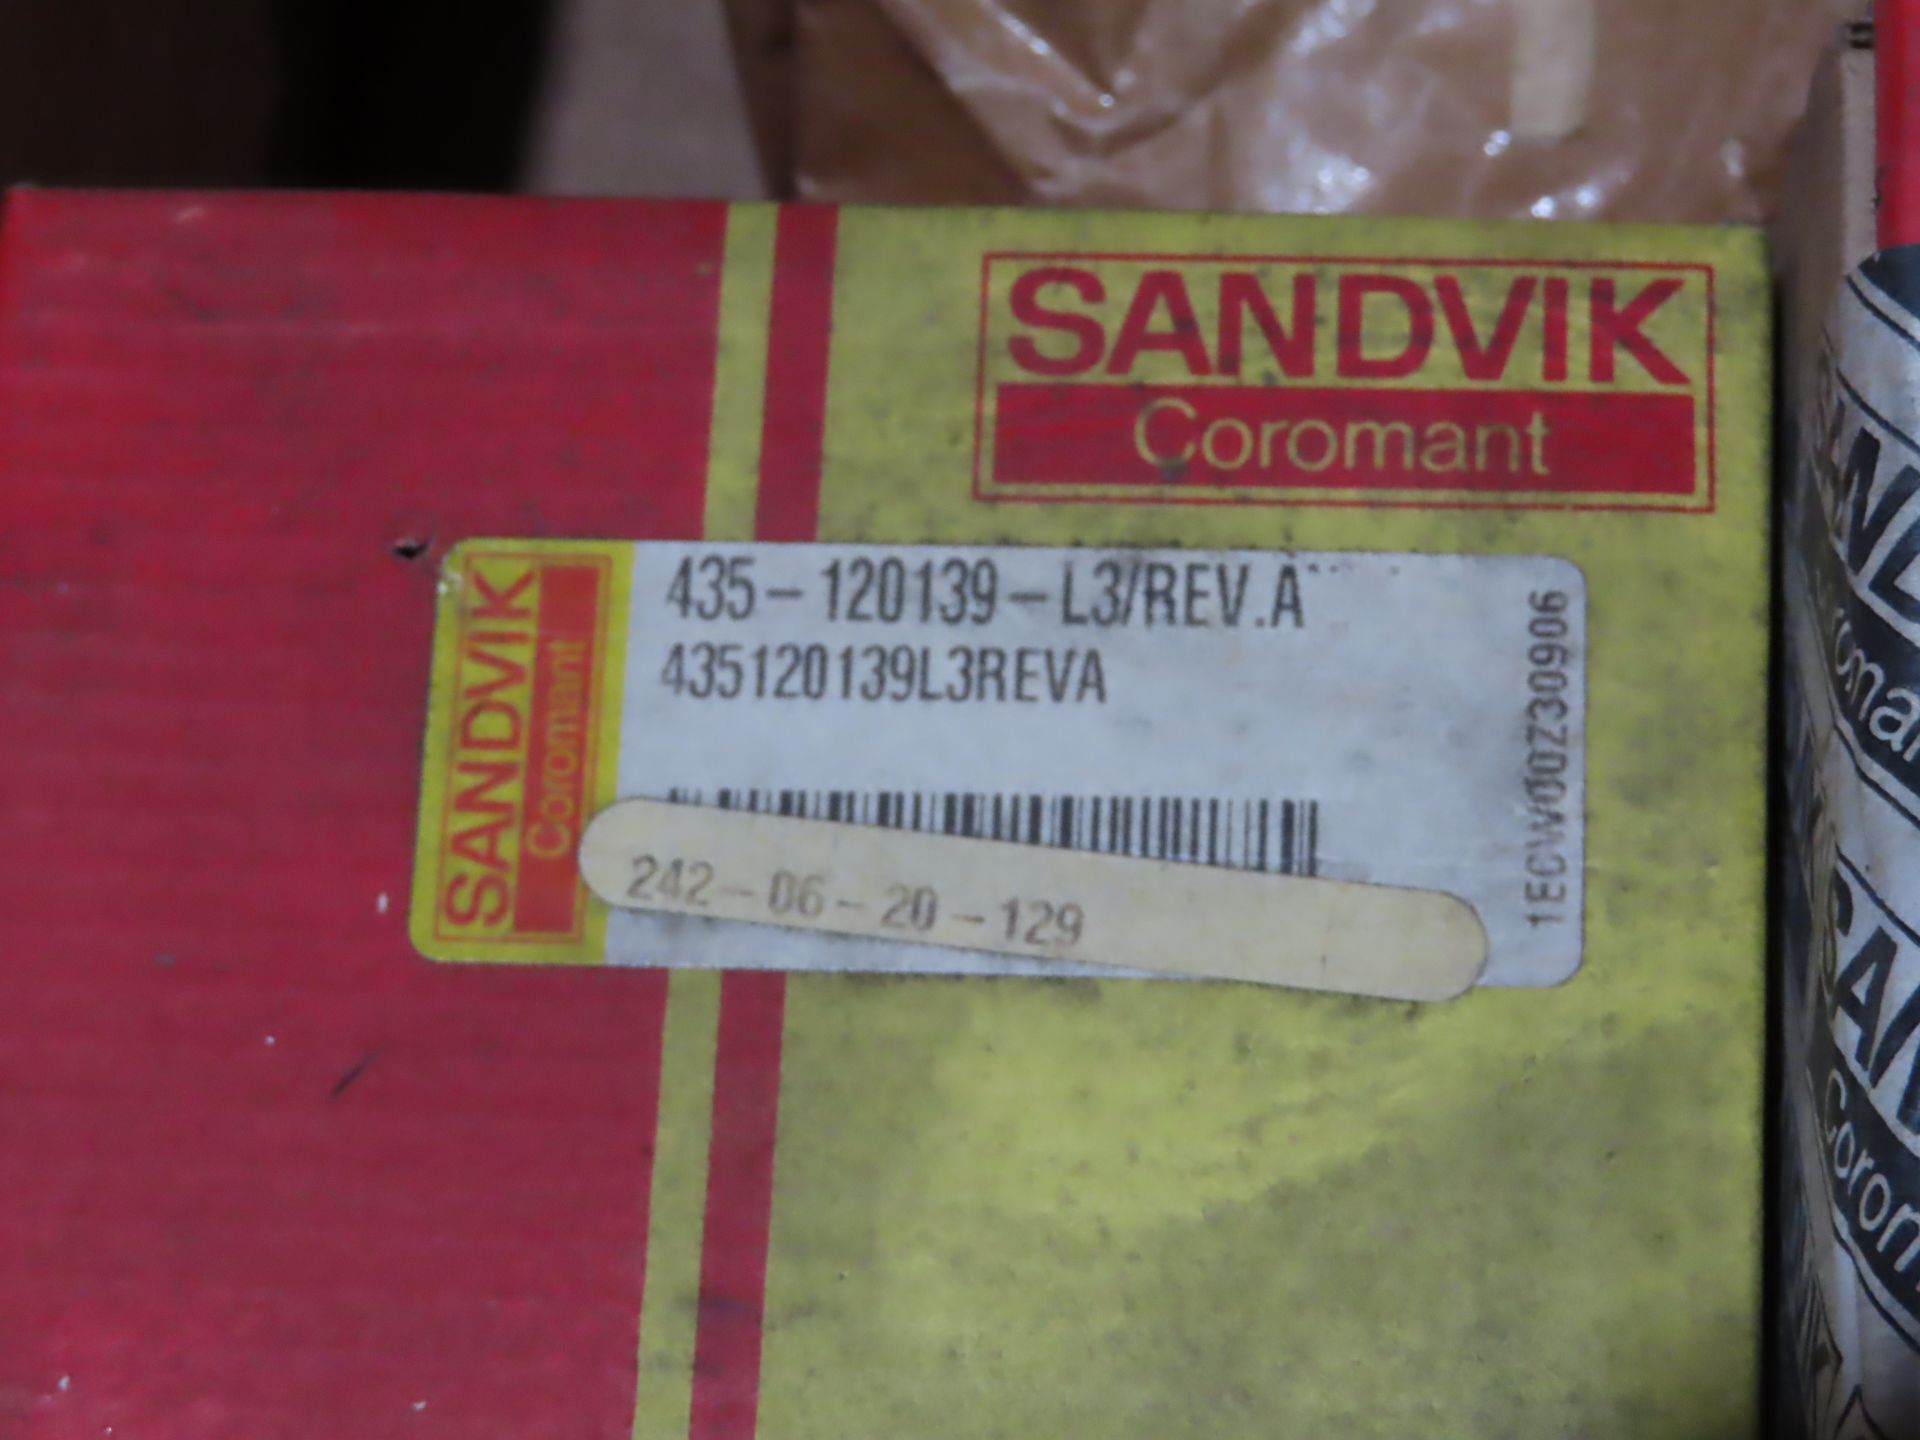 (Qty 3) Sandvik Coromant model 435-120139-L3. New in boxes. This lot can be picked up onsite with no - Image 2 of 2